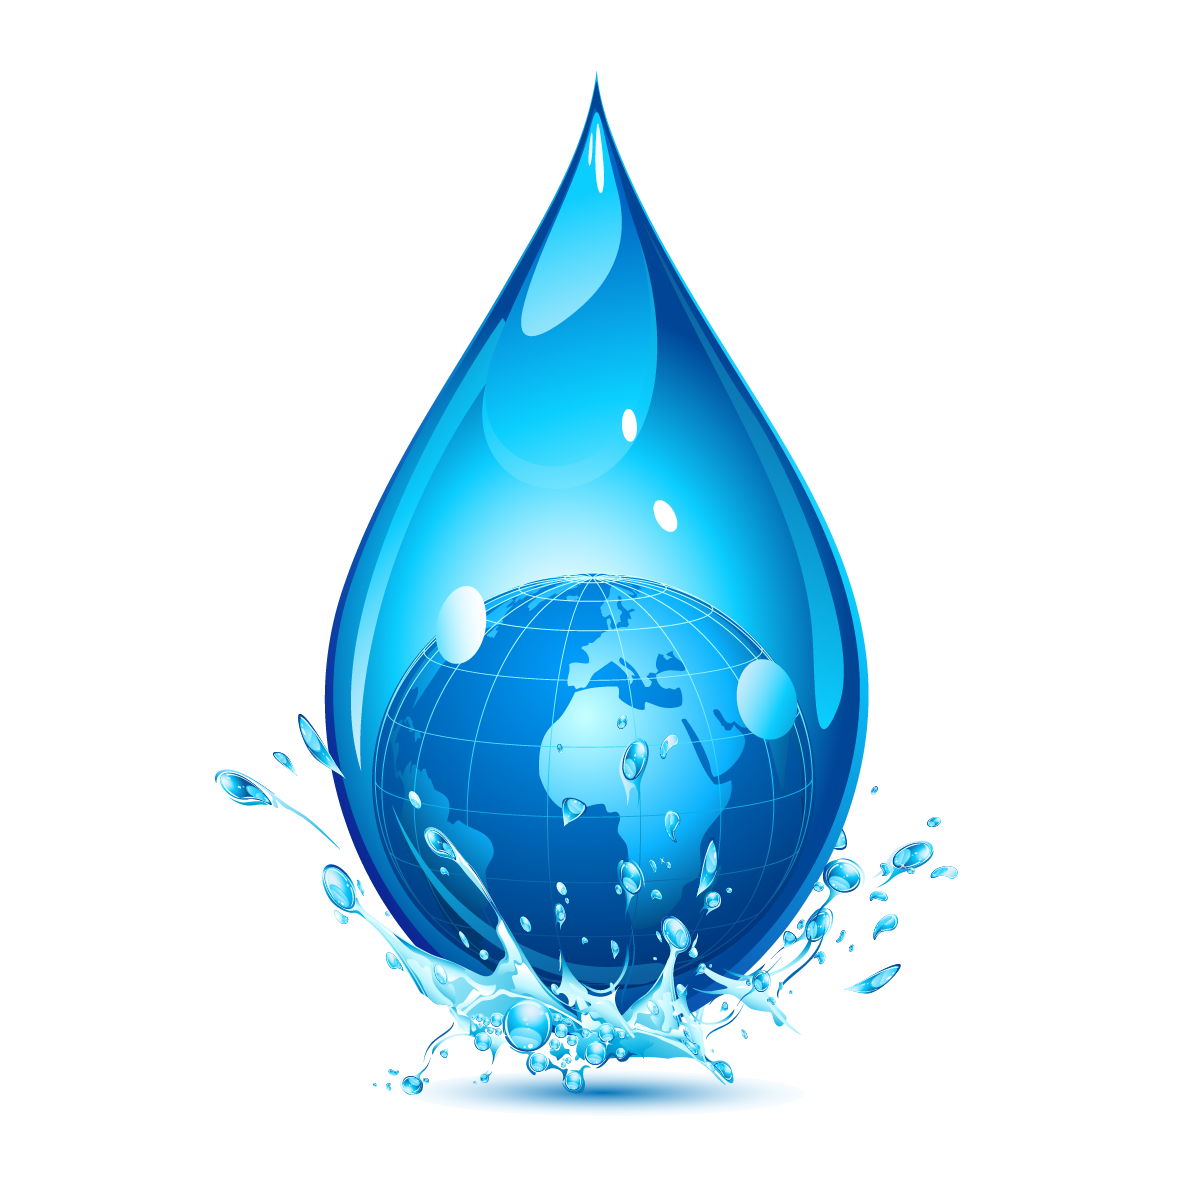 Download Water drops PNG Image For Free